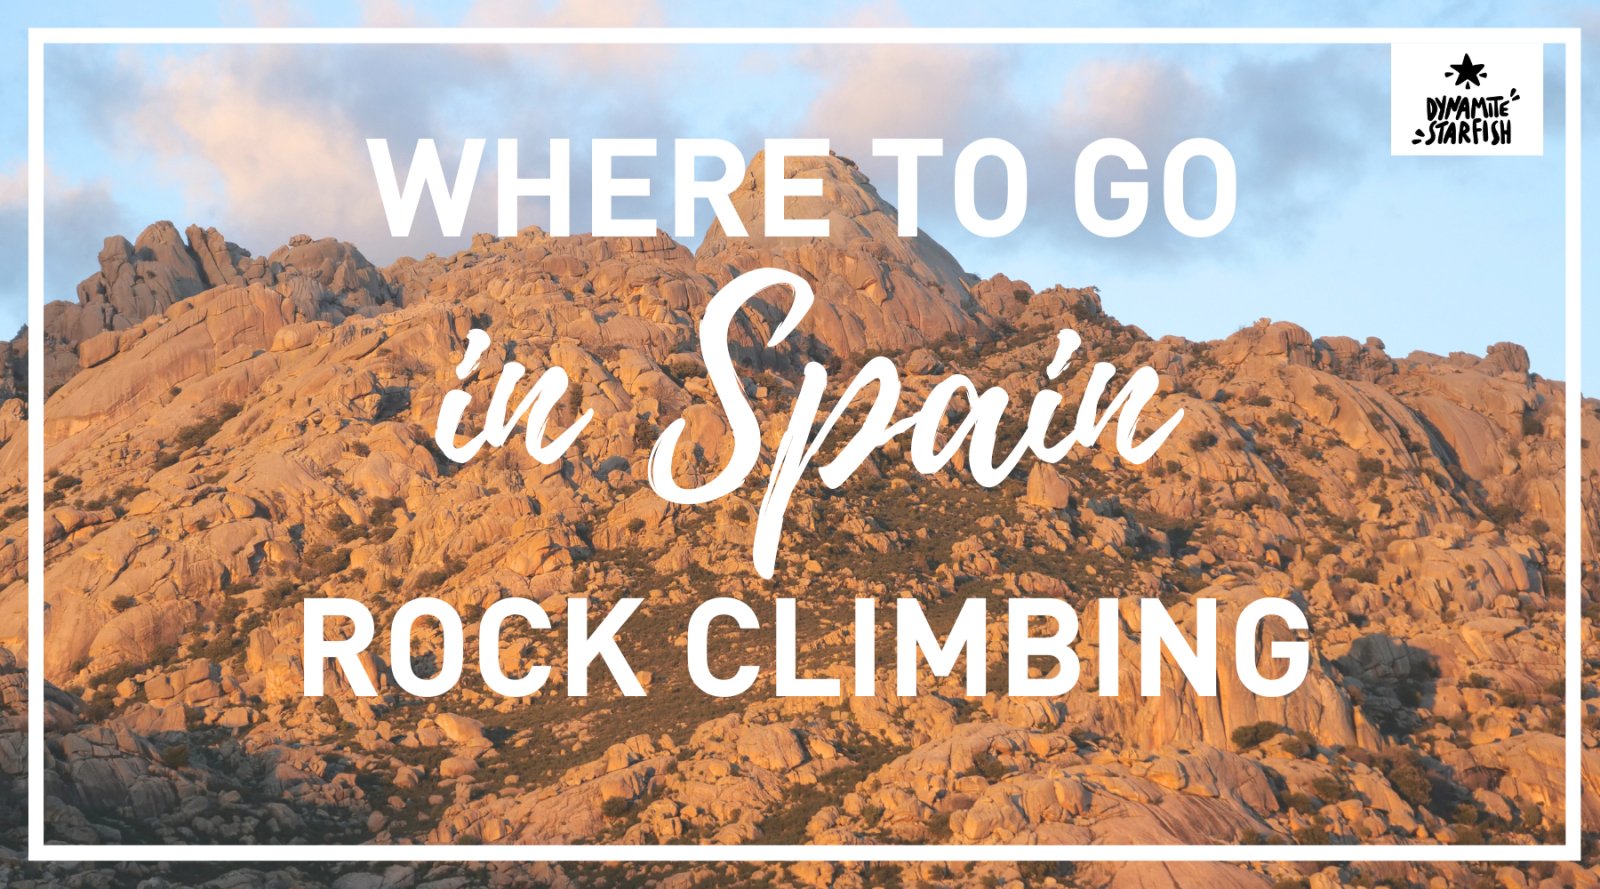 Where to go rock climbing in Spain? - Dynamite Starfish